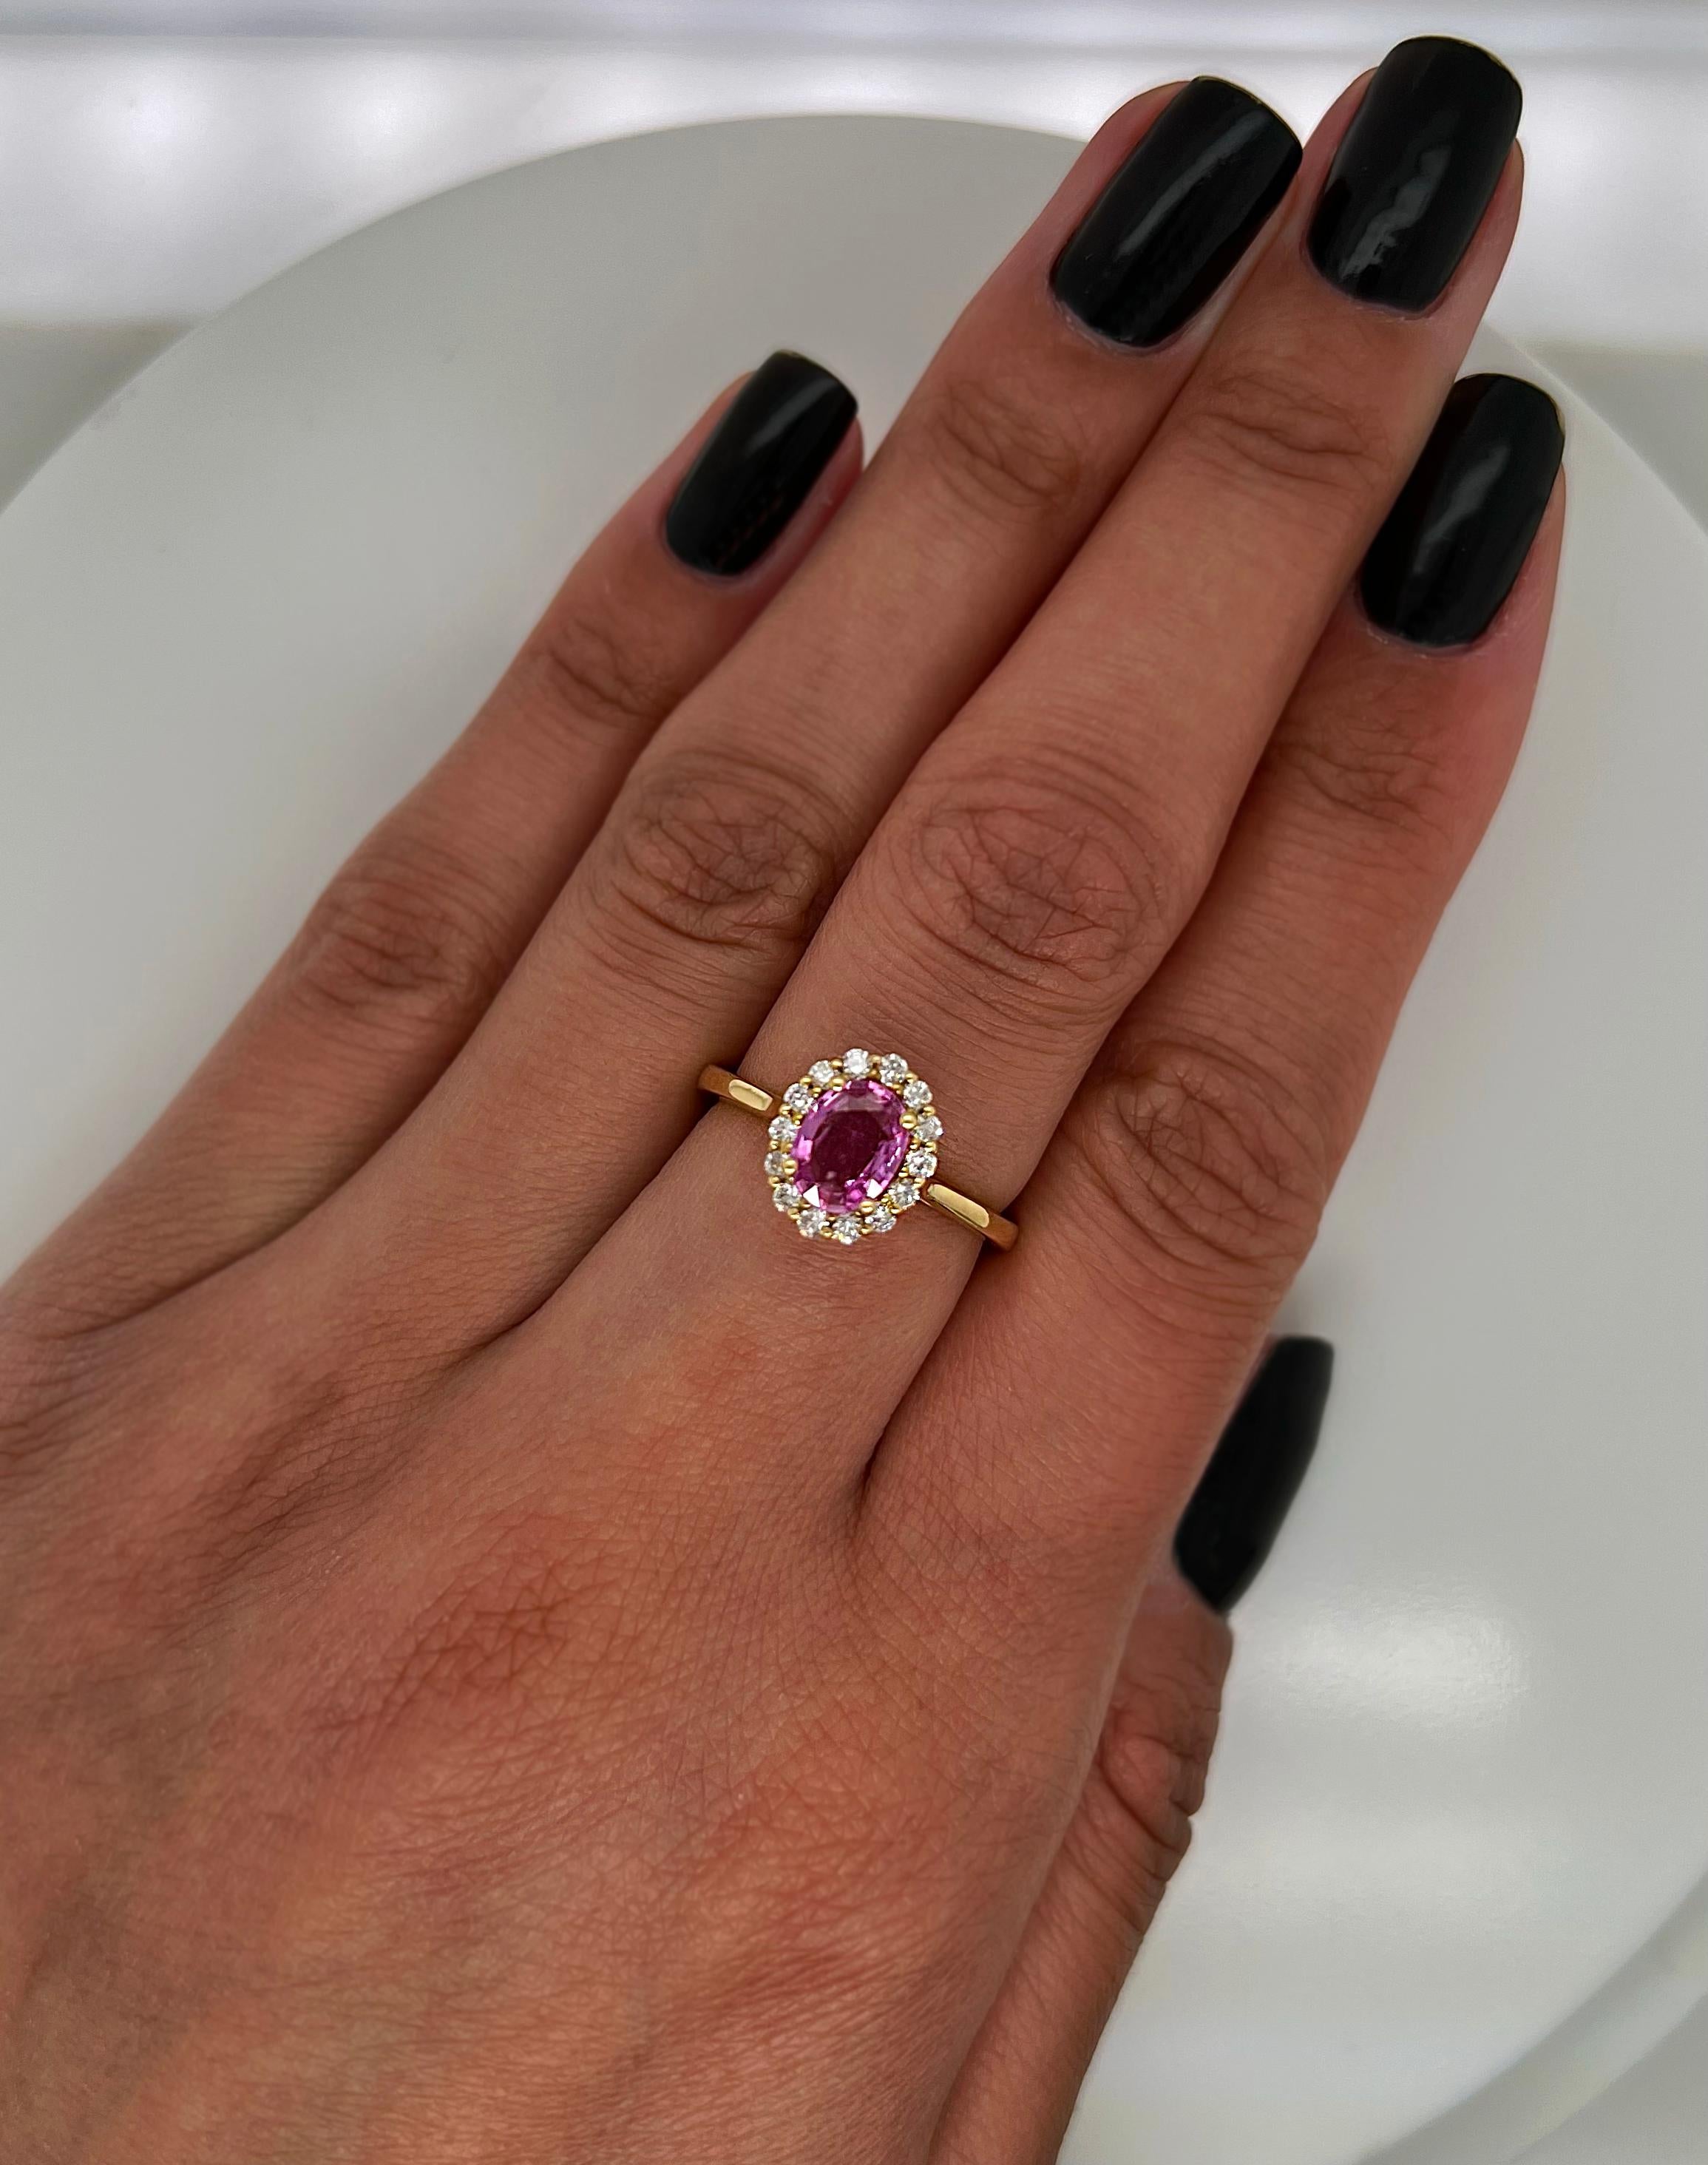 Oval Cut 1.33 Total Carat Pink Sapphire Diamond Halo Ladies Ring For Sale